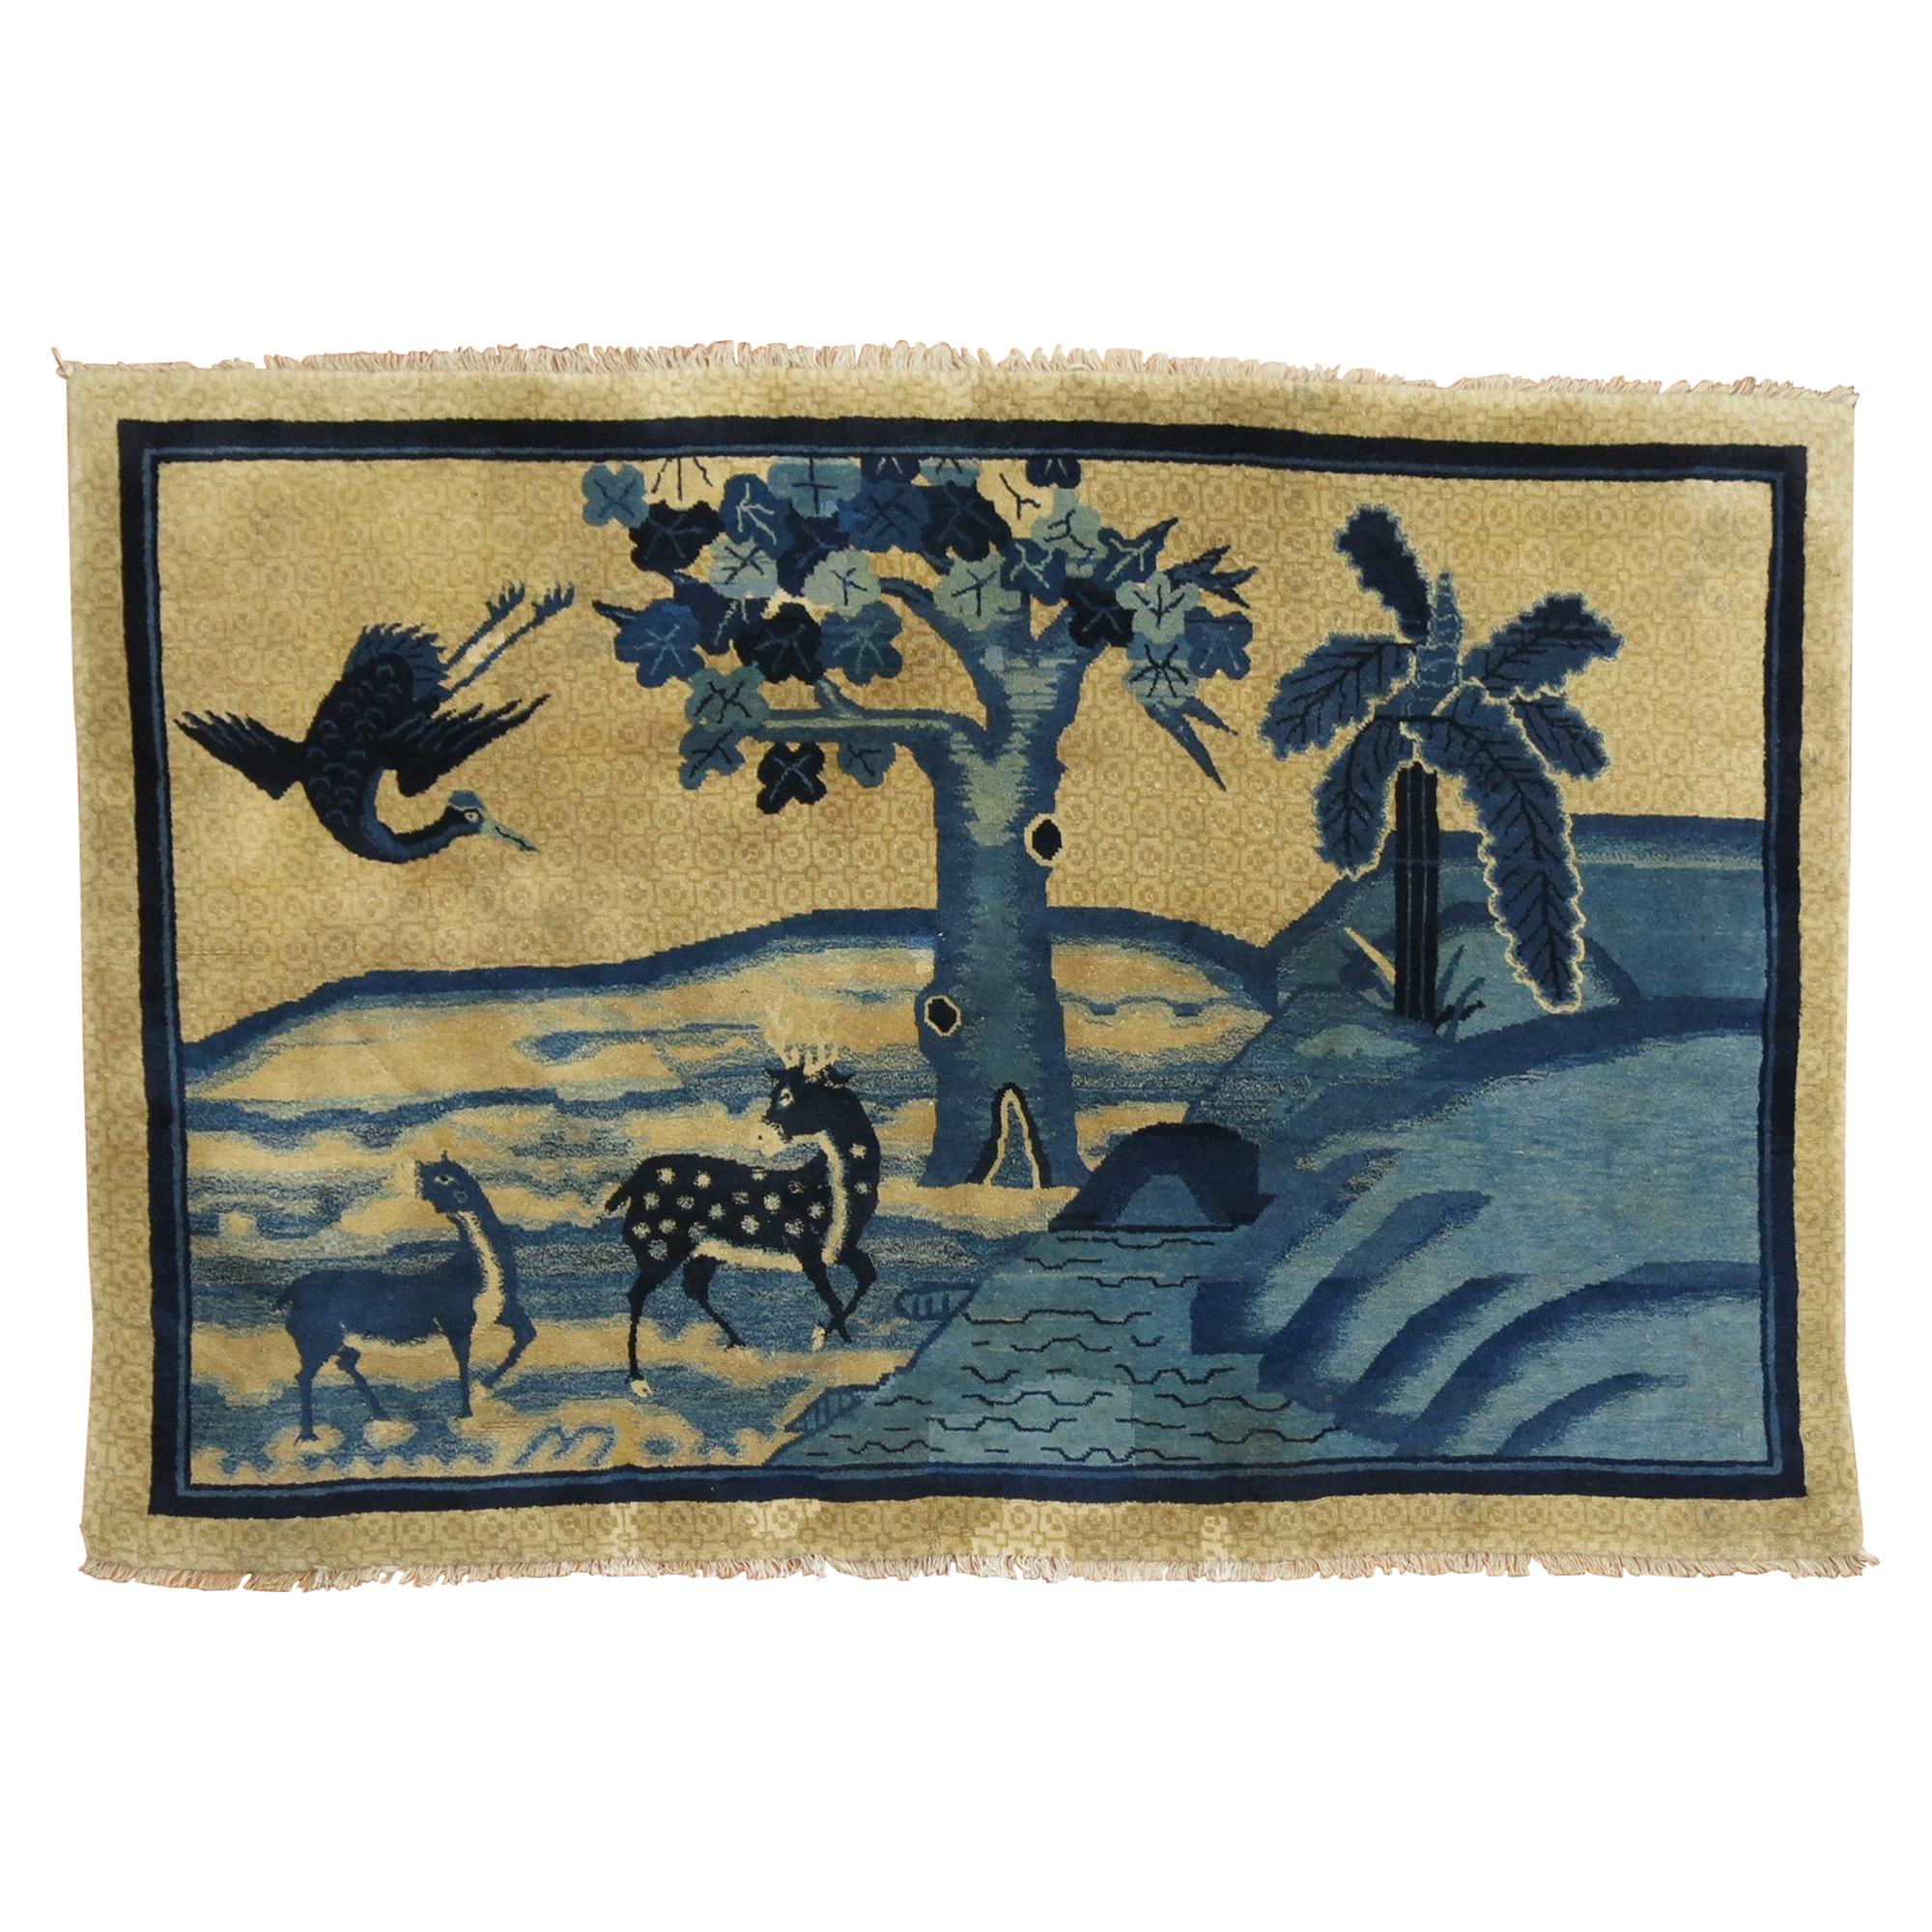 Blue Tan Chinese Animal Pictorial Landscape Rug